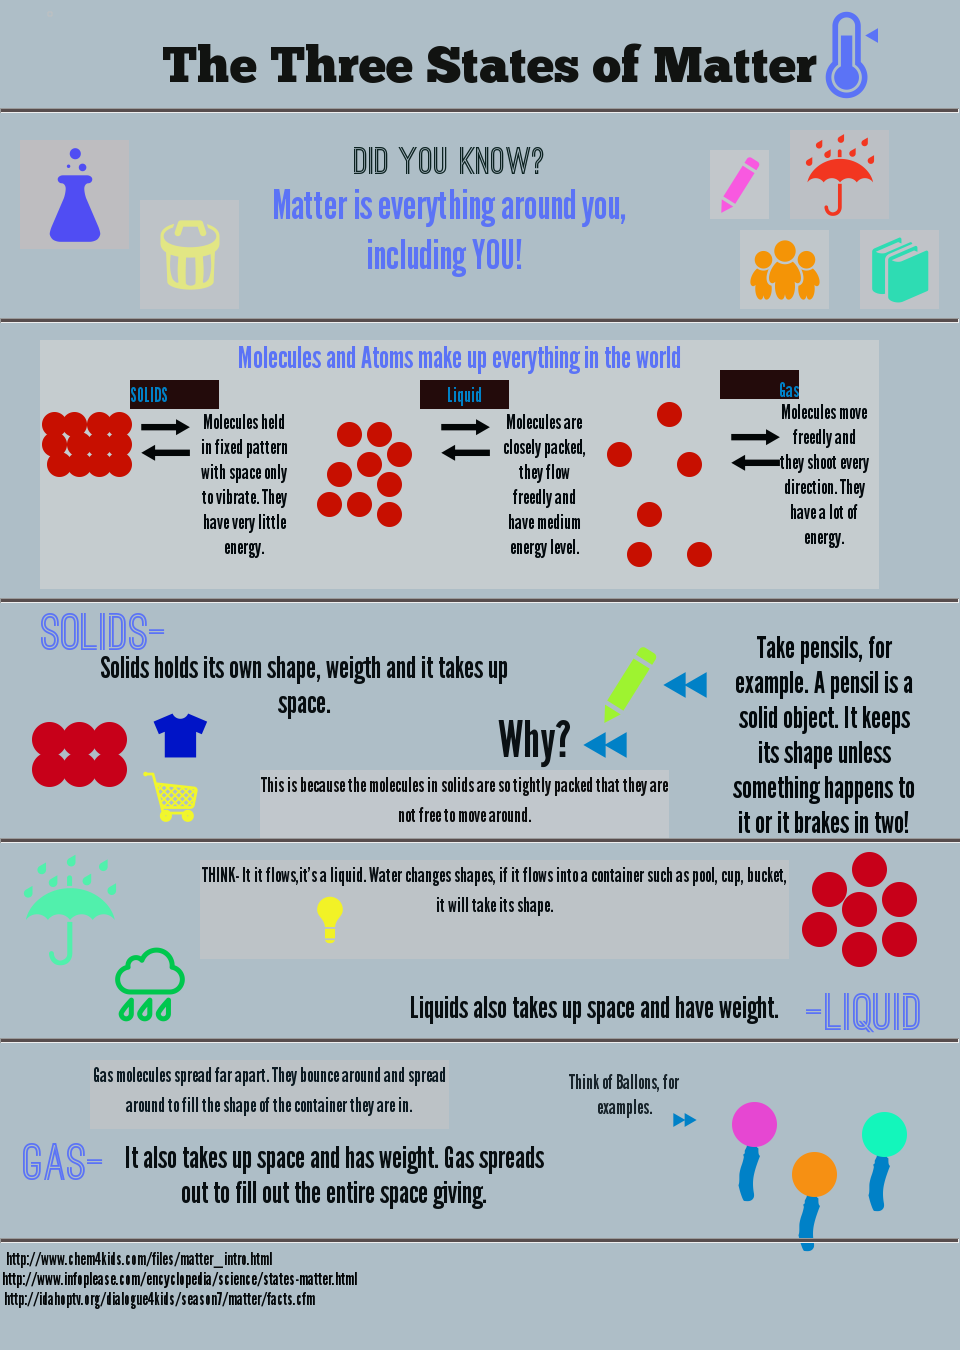 Anti-Matter infographic. (View it quickly before it meets up with the matter infographic ...